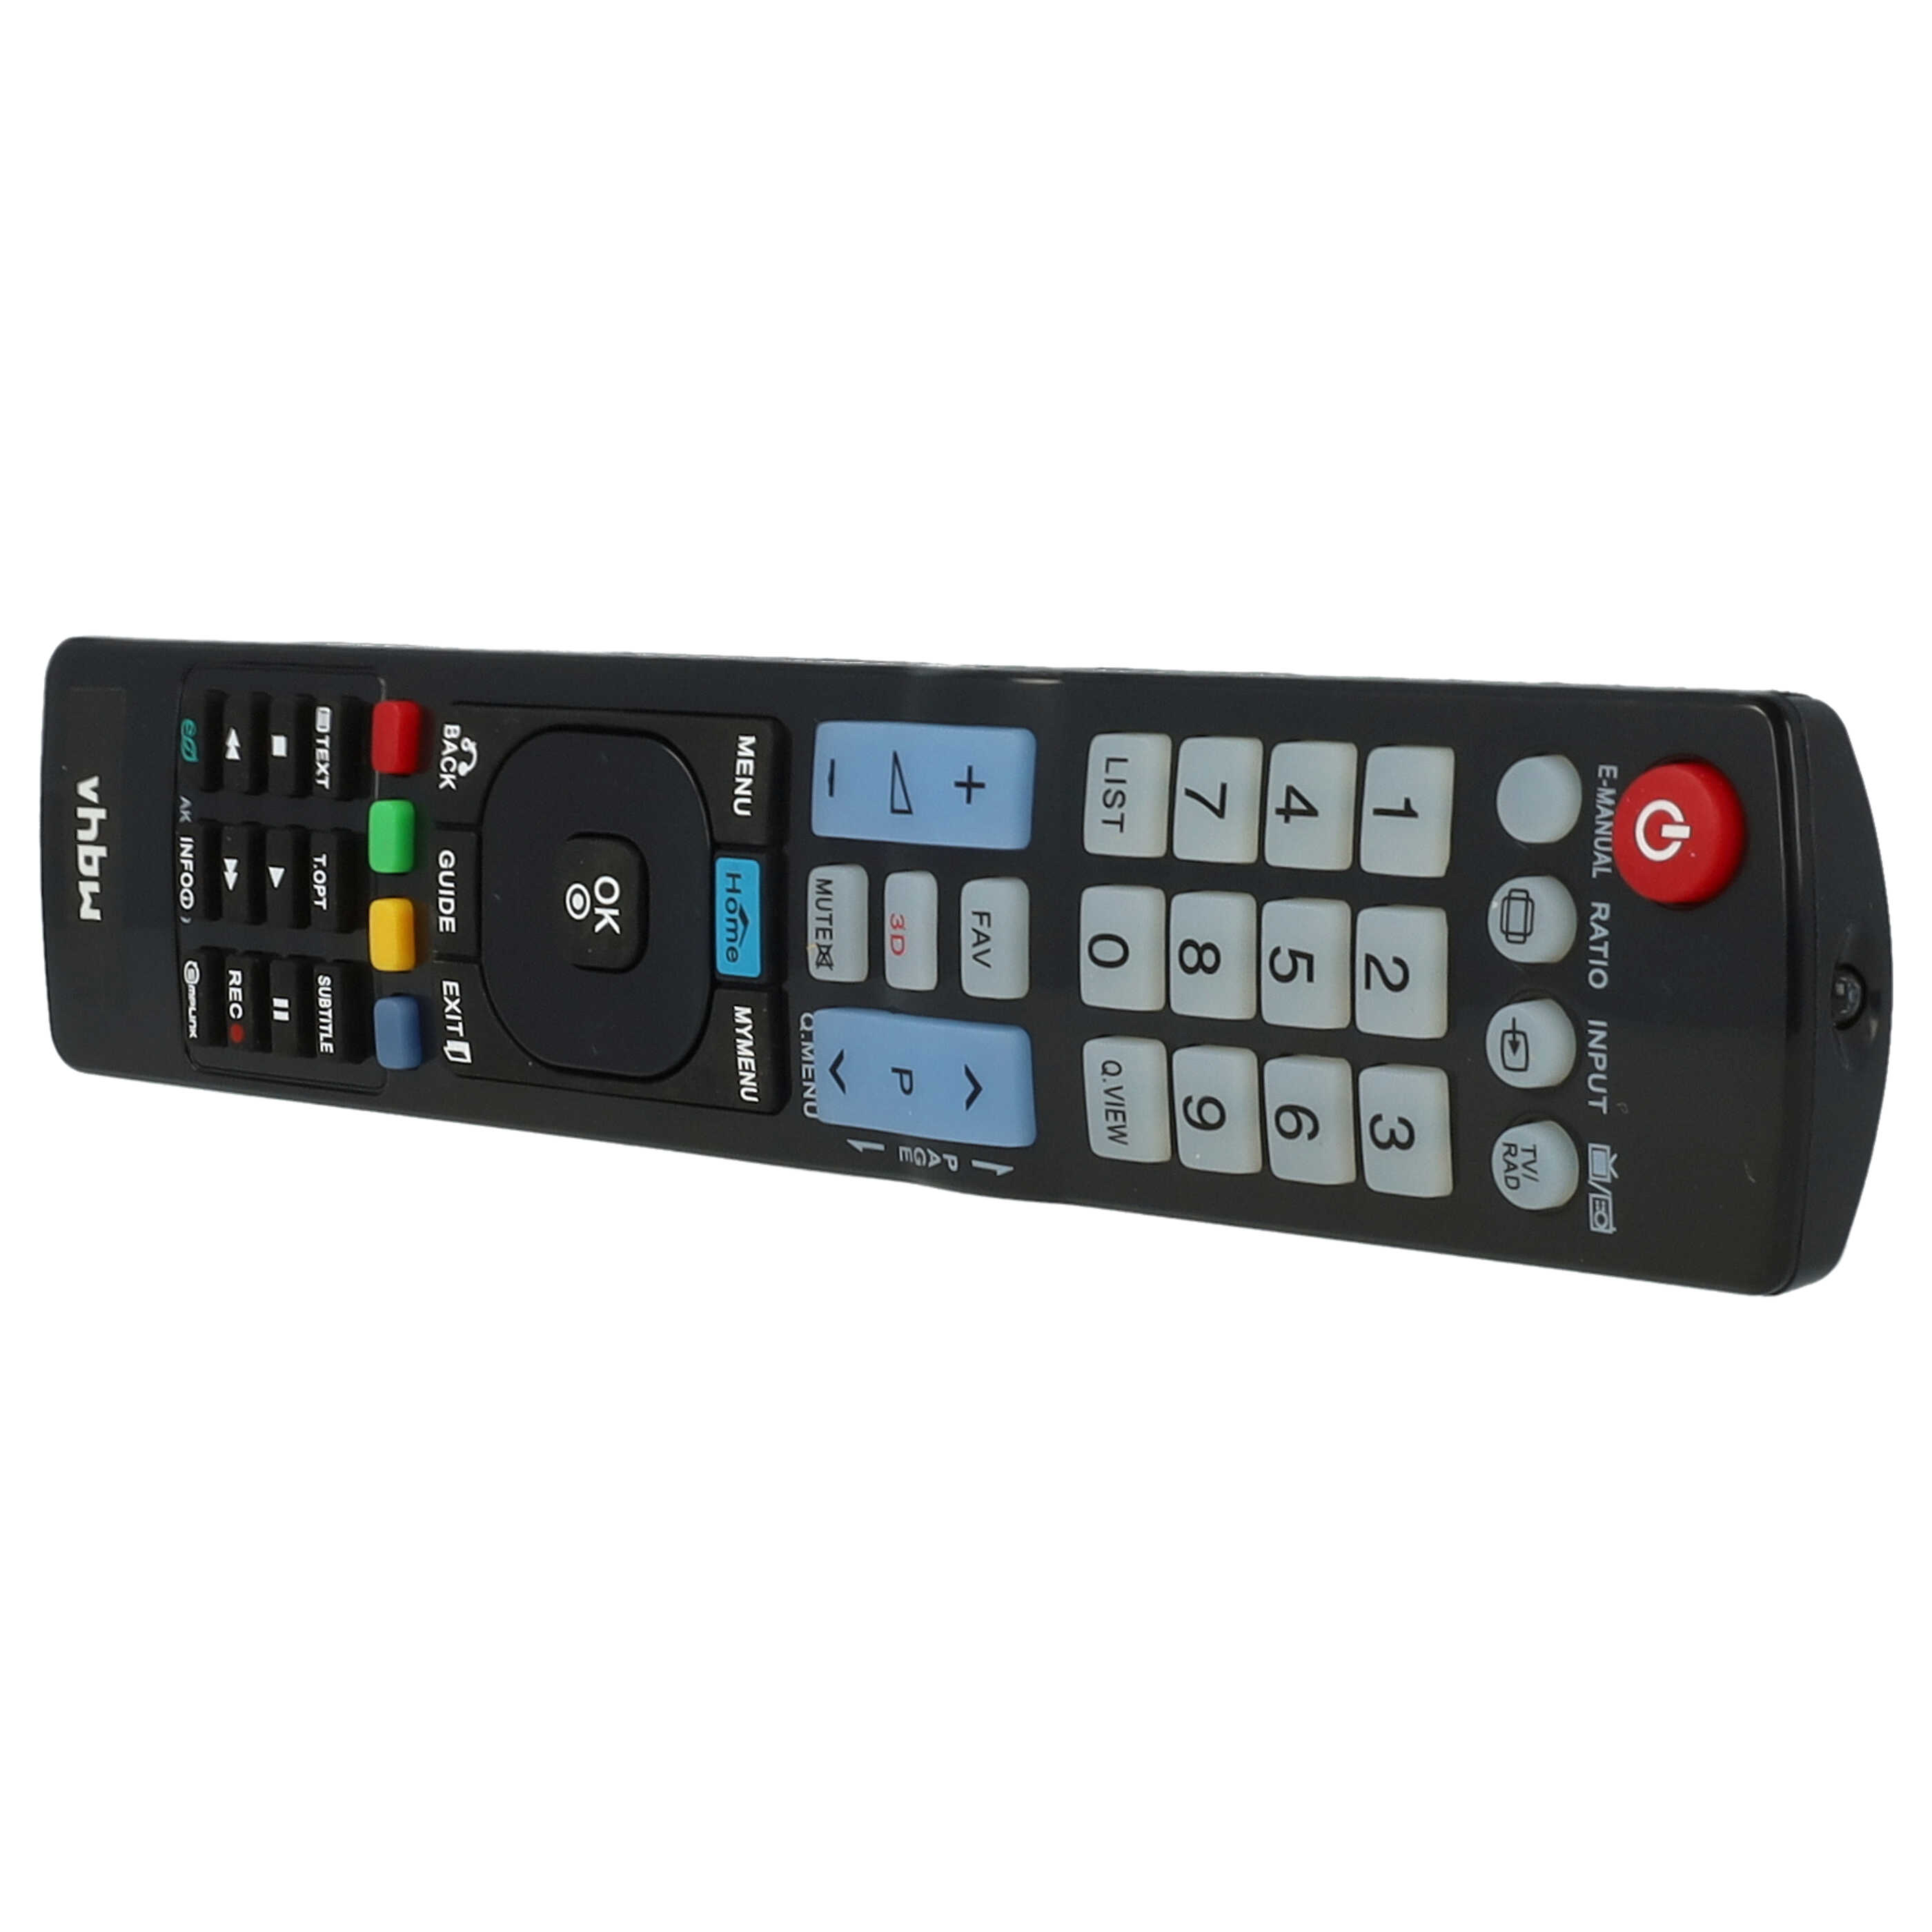 Remote Control replaces LG AKB73615309 for LG TV